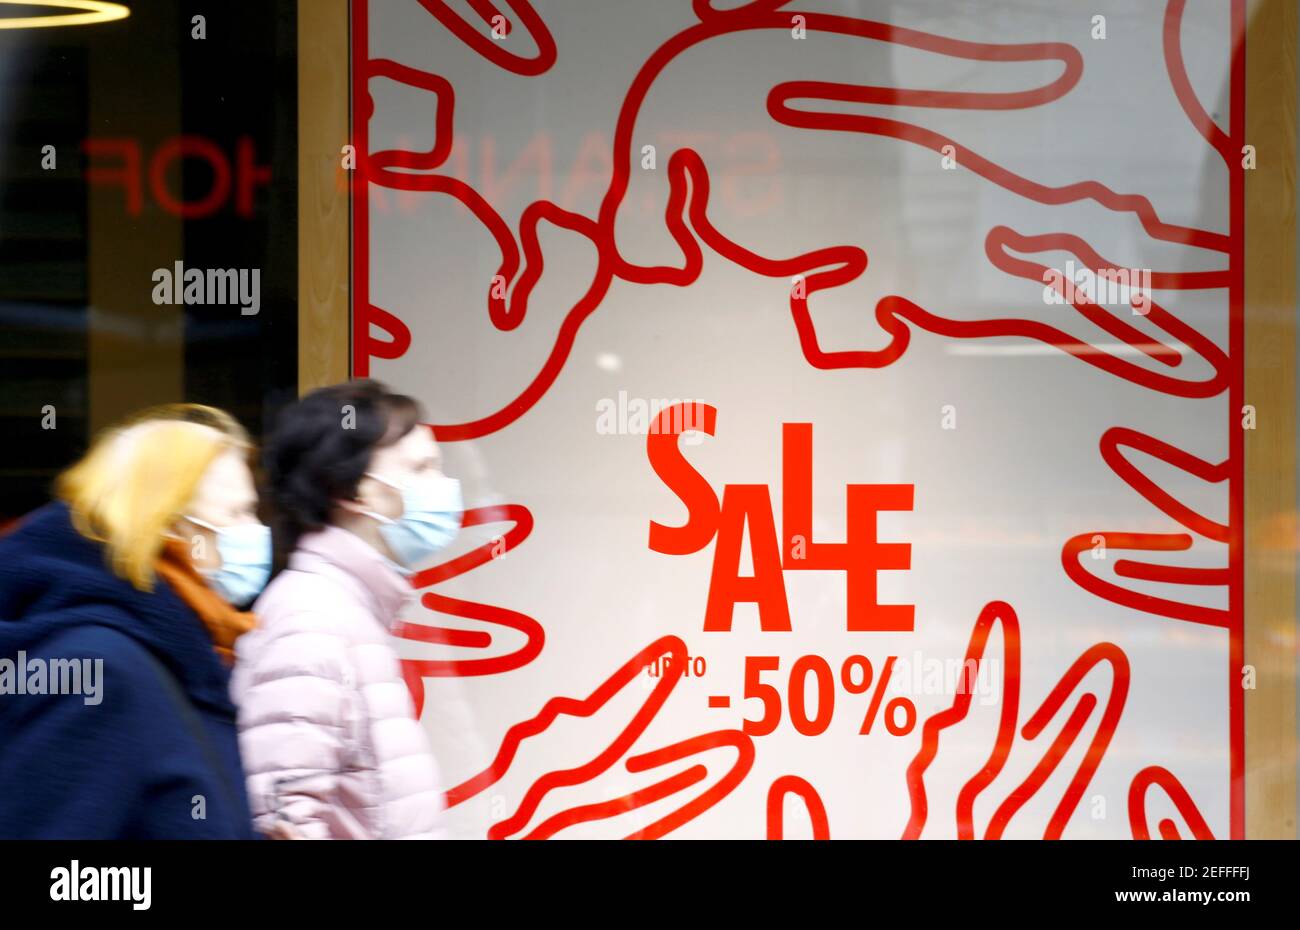 Geboorte geven rol Intiem Posters offering special discount on sales are seen at a Lacoste store, as  the spread of the coronavirus disease (COVID-19) continues, at the  Bahnhofstrasse shopping street in Zurich, Switzerland February 17, 2021.